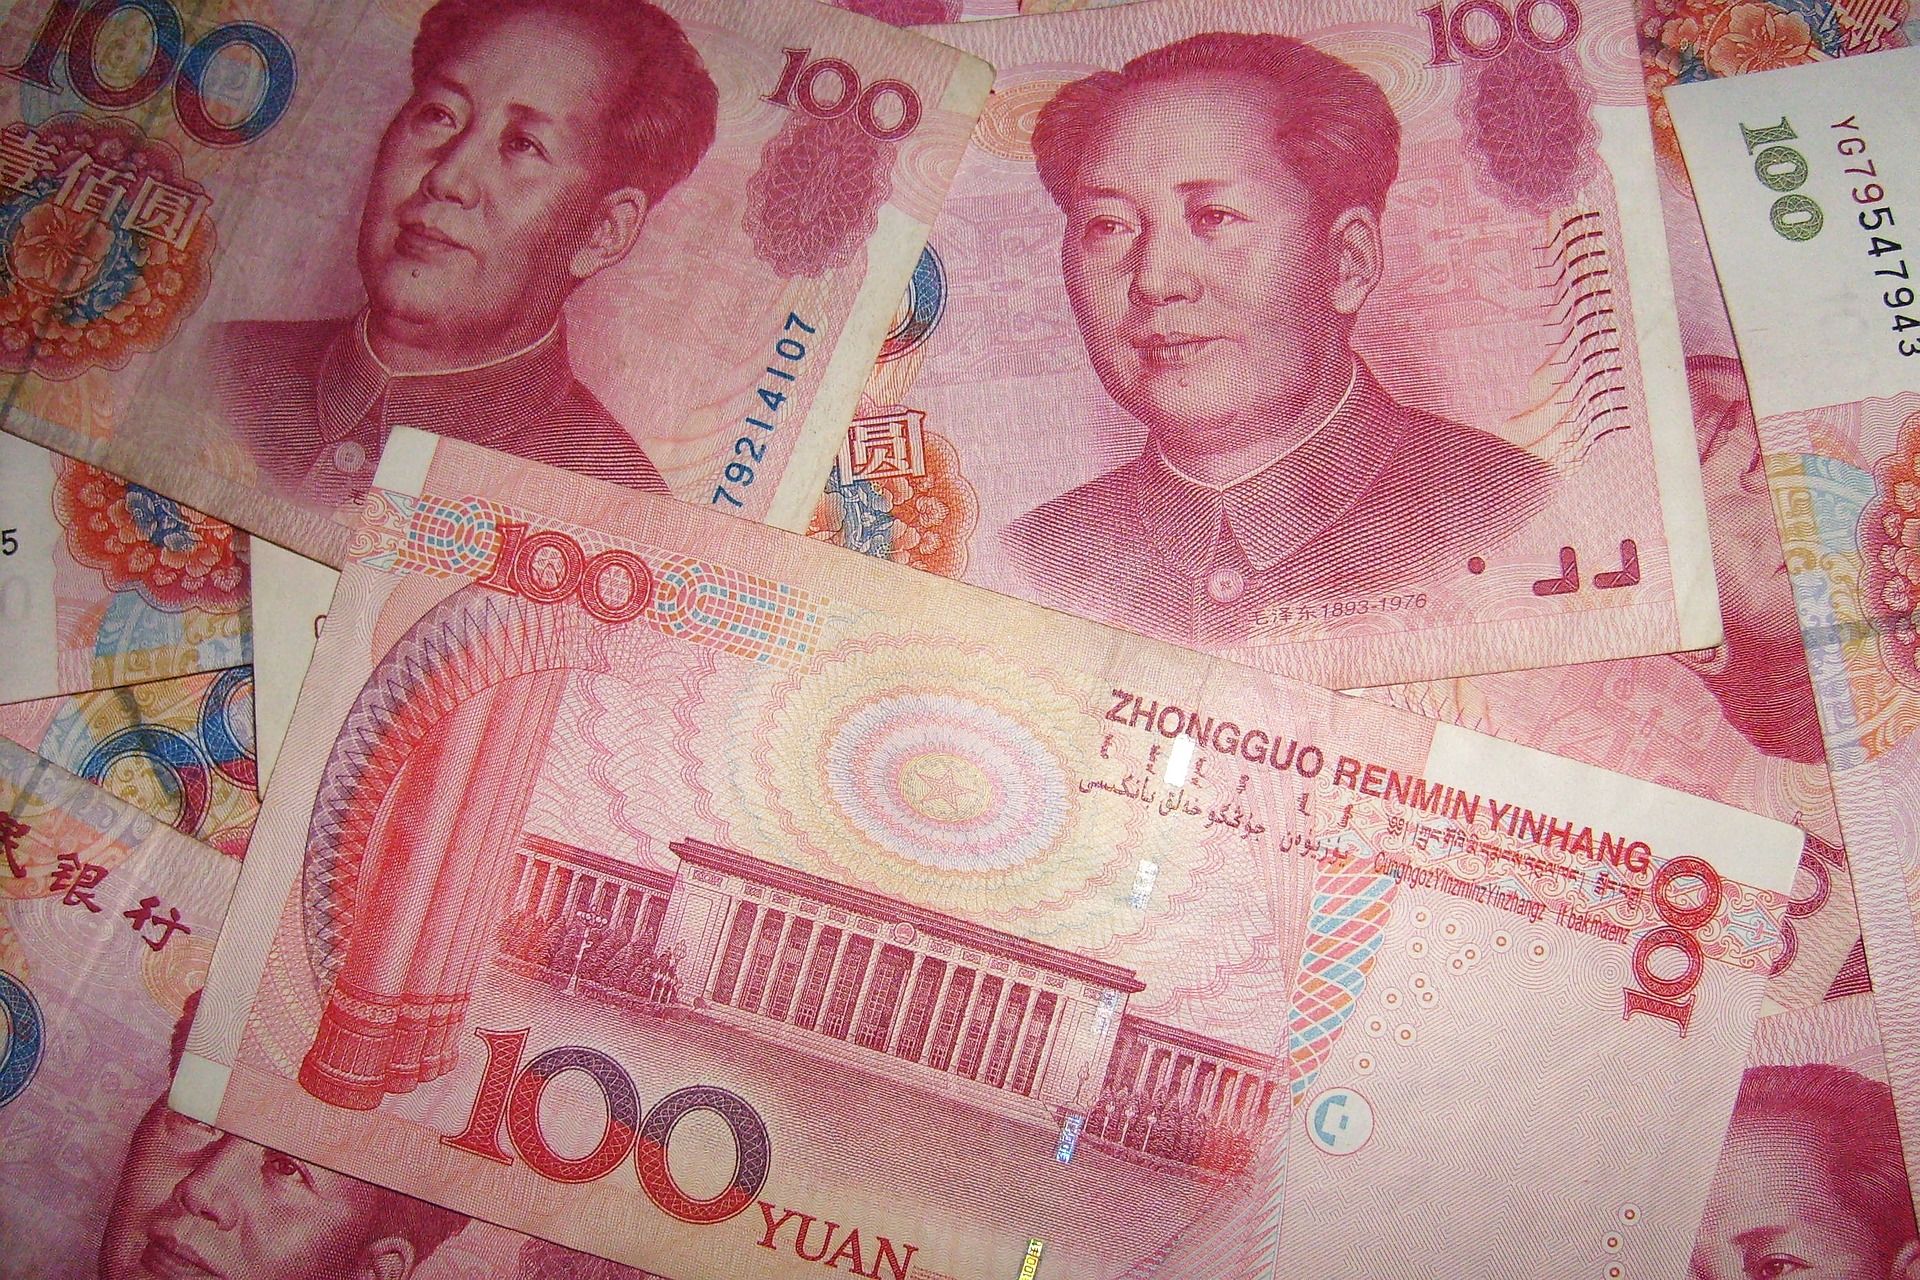 Russia has been using the Chinese yuan to get around sweeping Western sanctions — but this side door may be closing